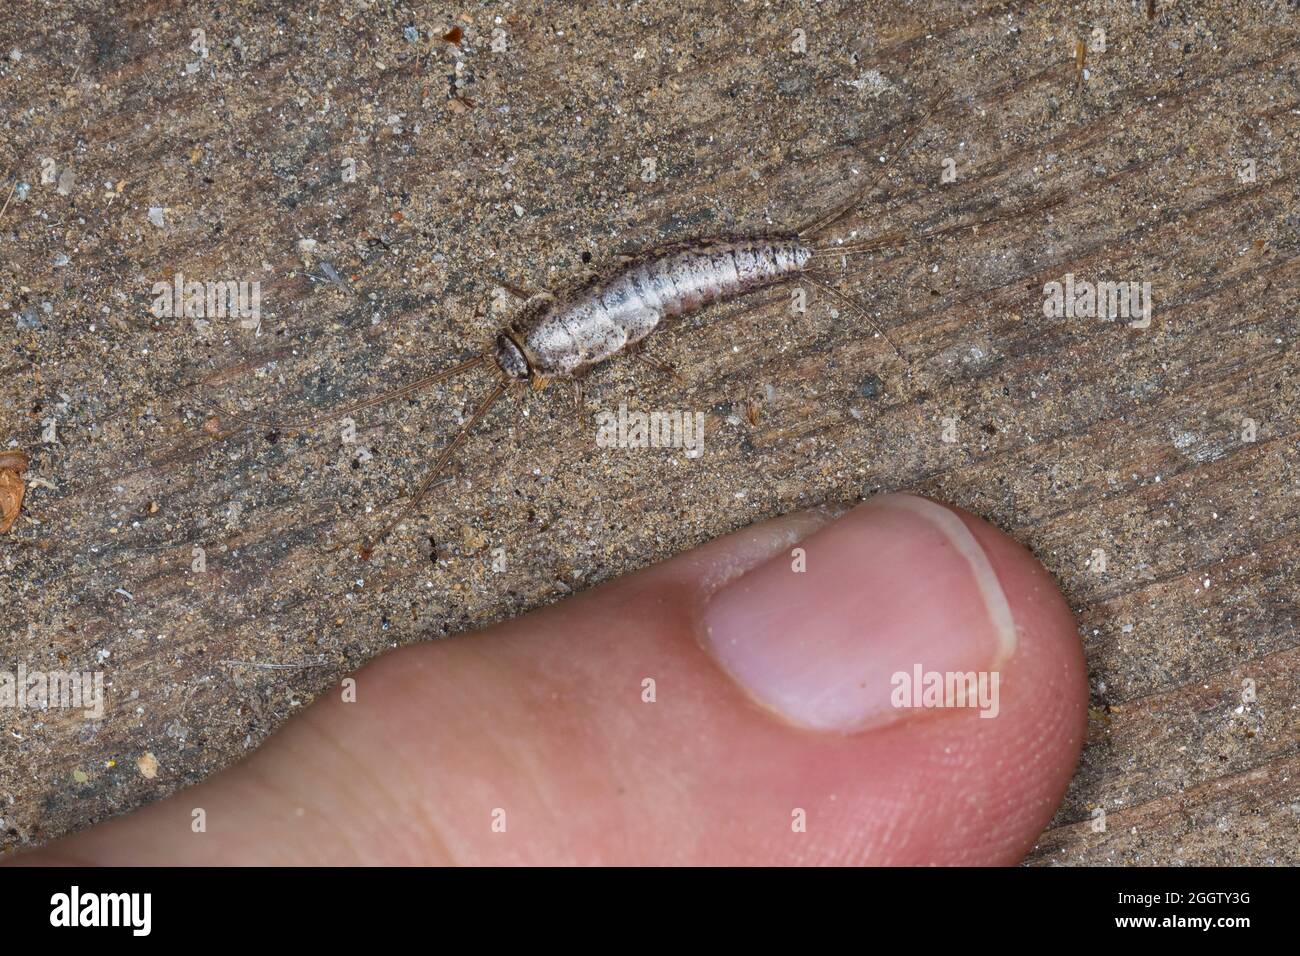 four-lined silverfish (Ctenolepisma lineata, Ctenolepisma lineatum), with finger for size comparison, Germany Stock Photo